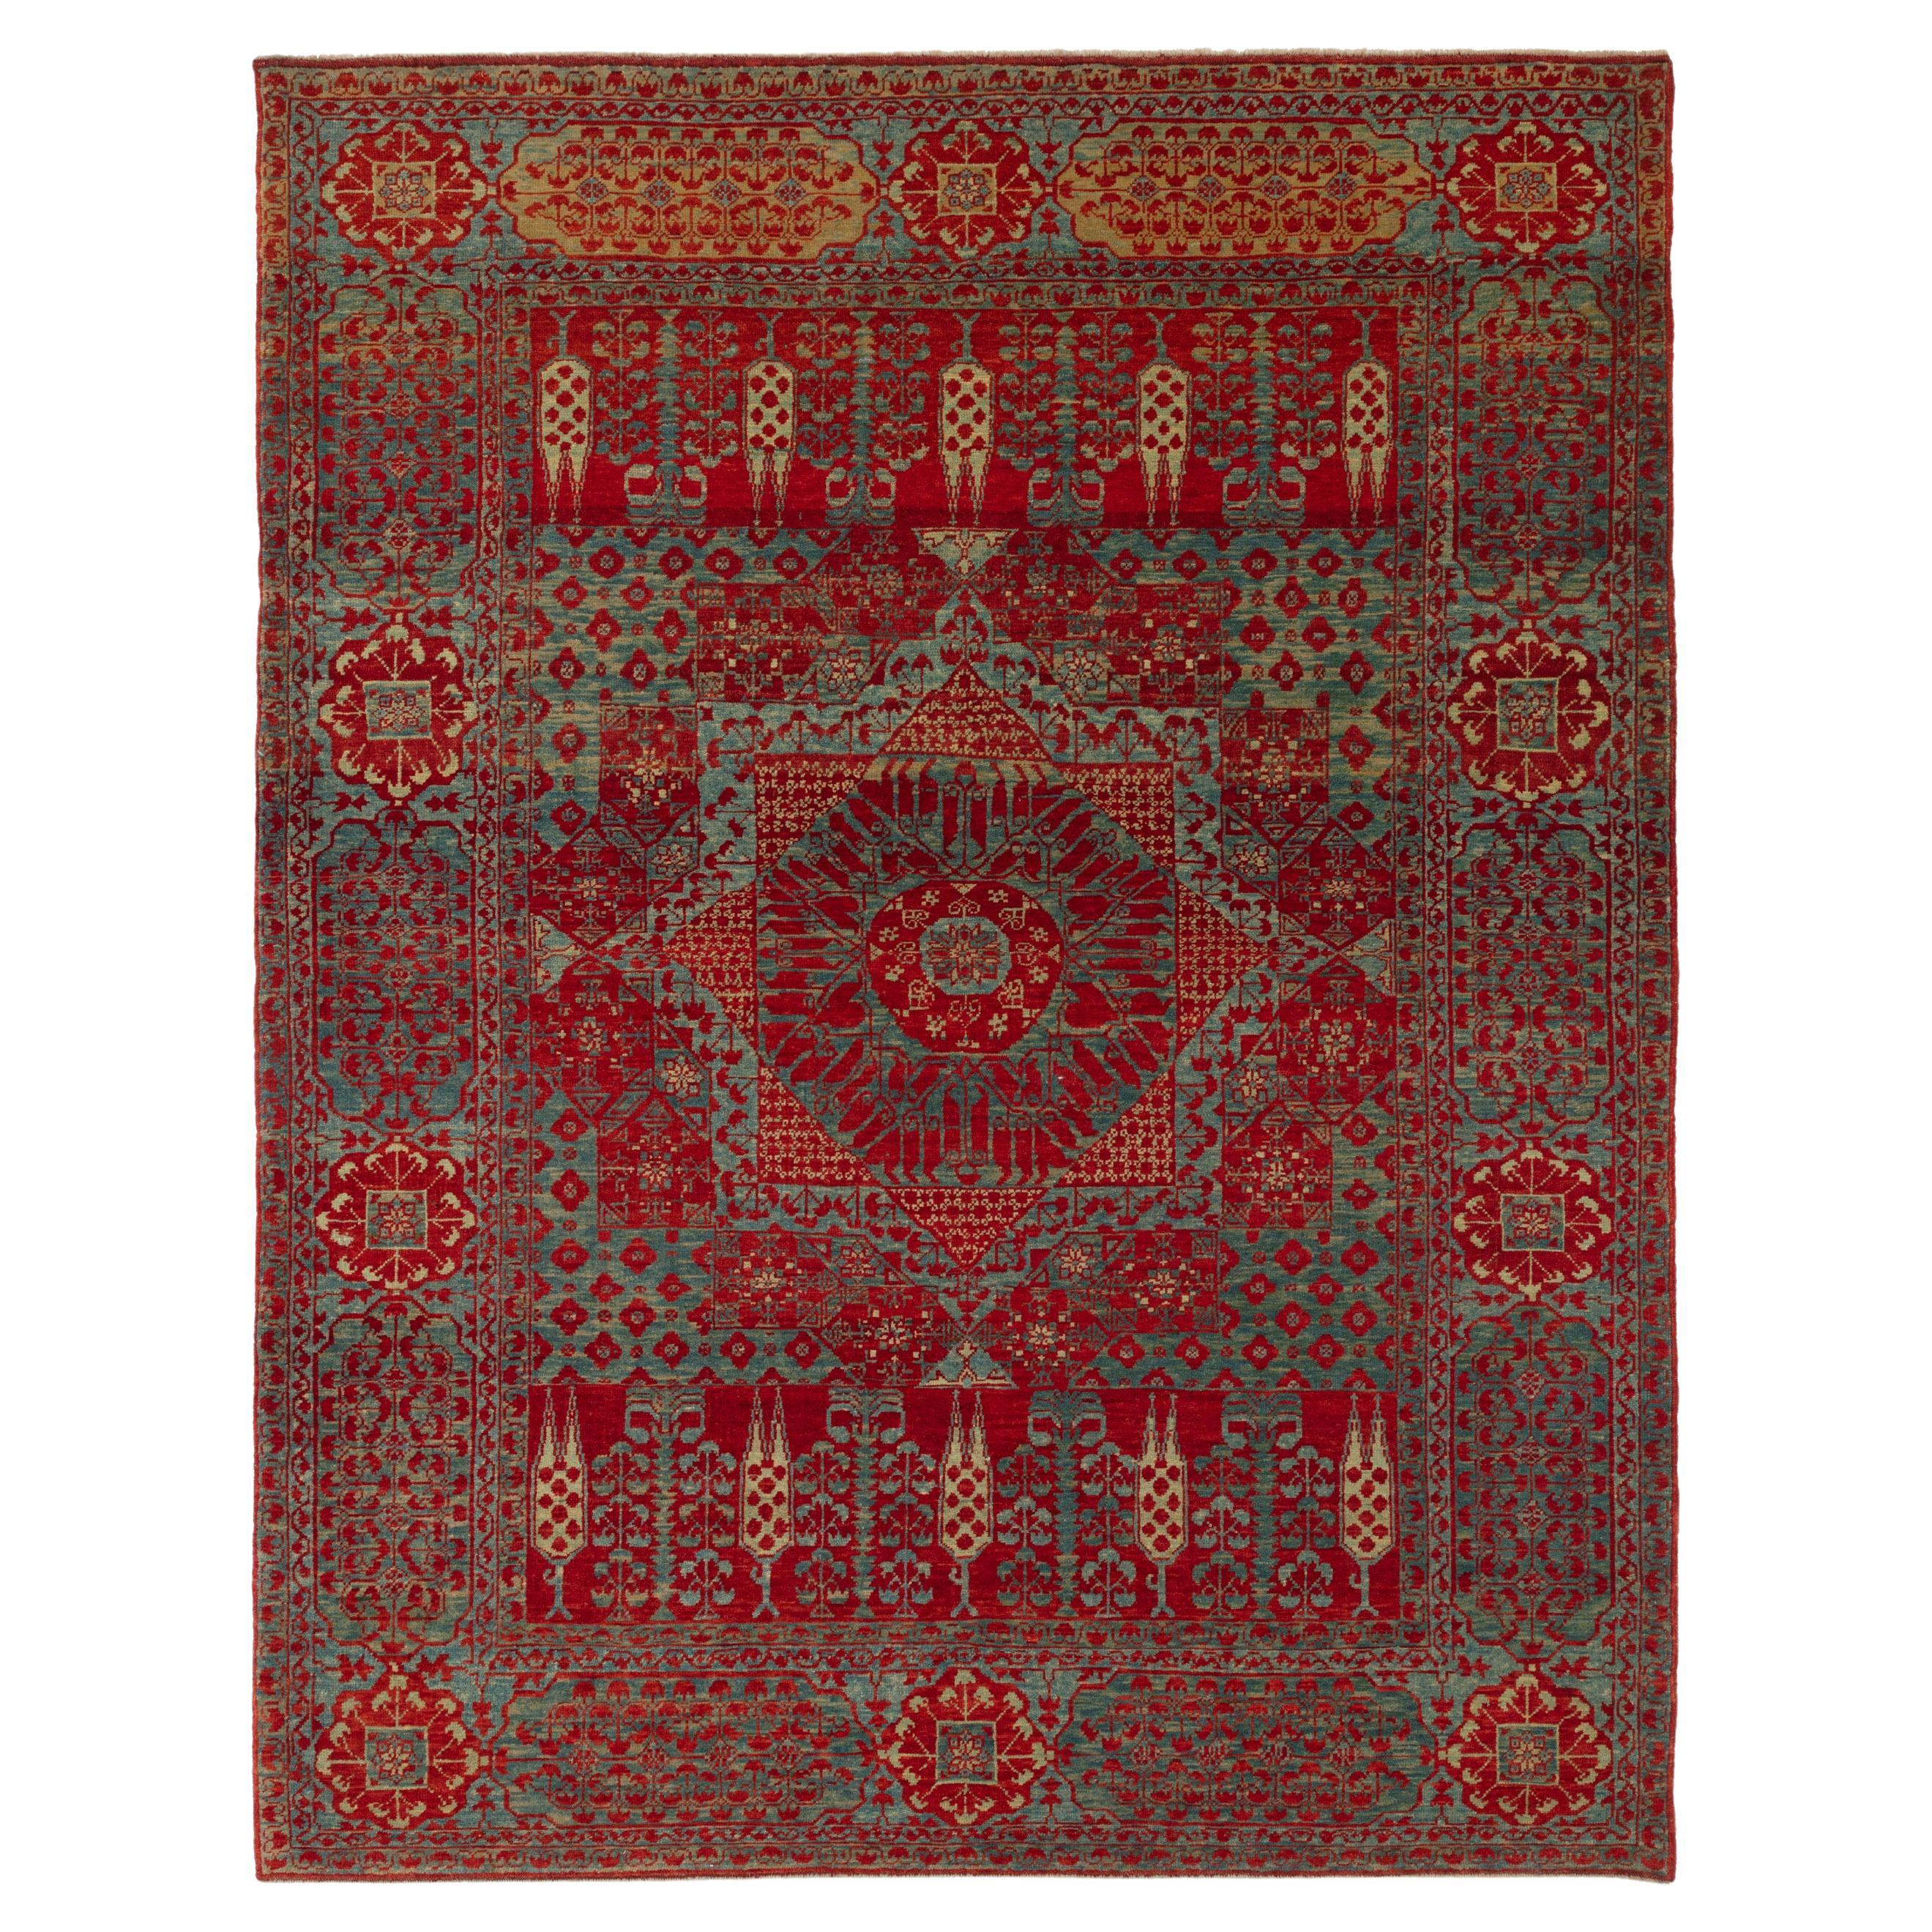 Ararat Rugs Mamluk Rug with Palm Trees and Cypresses Revival Carpet Natural Dyed